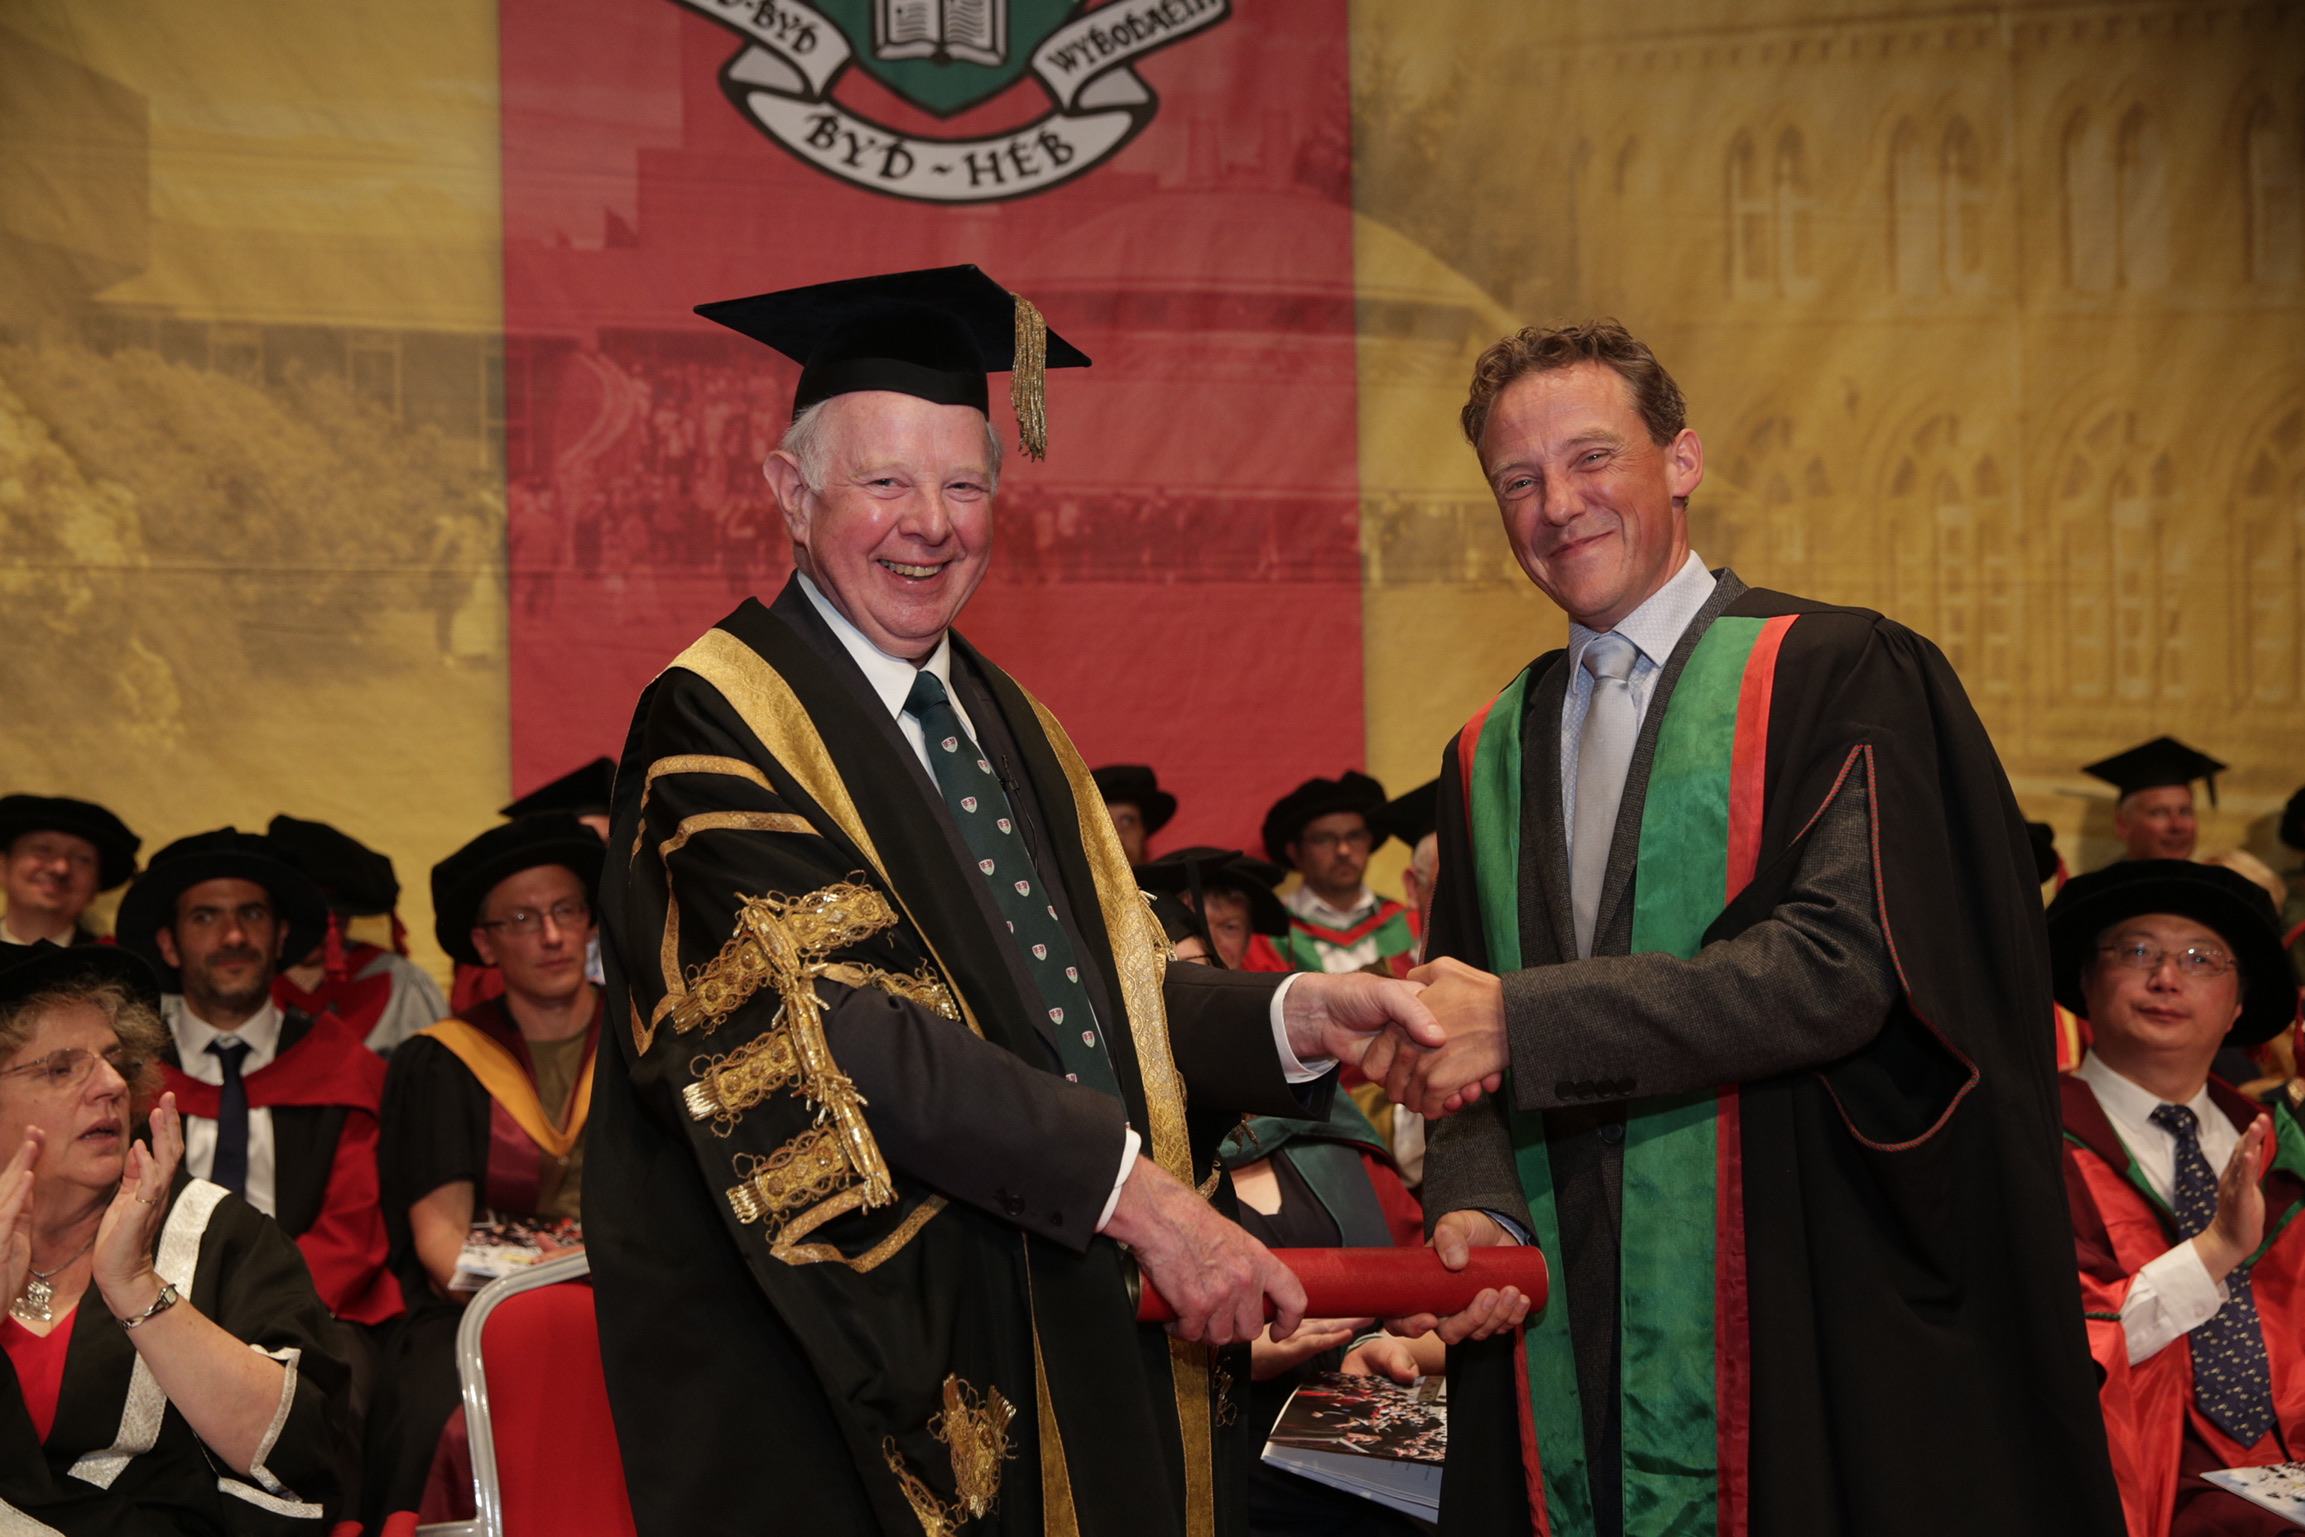 Aberystwyth University Chancellor, the Rt Hon. the Lord Thomas of Cwmgiedd with Bonamy Grimes MBE, Honorary Fellow of Aberystwyth University